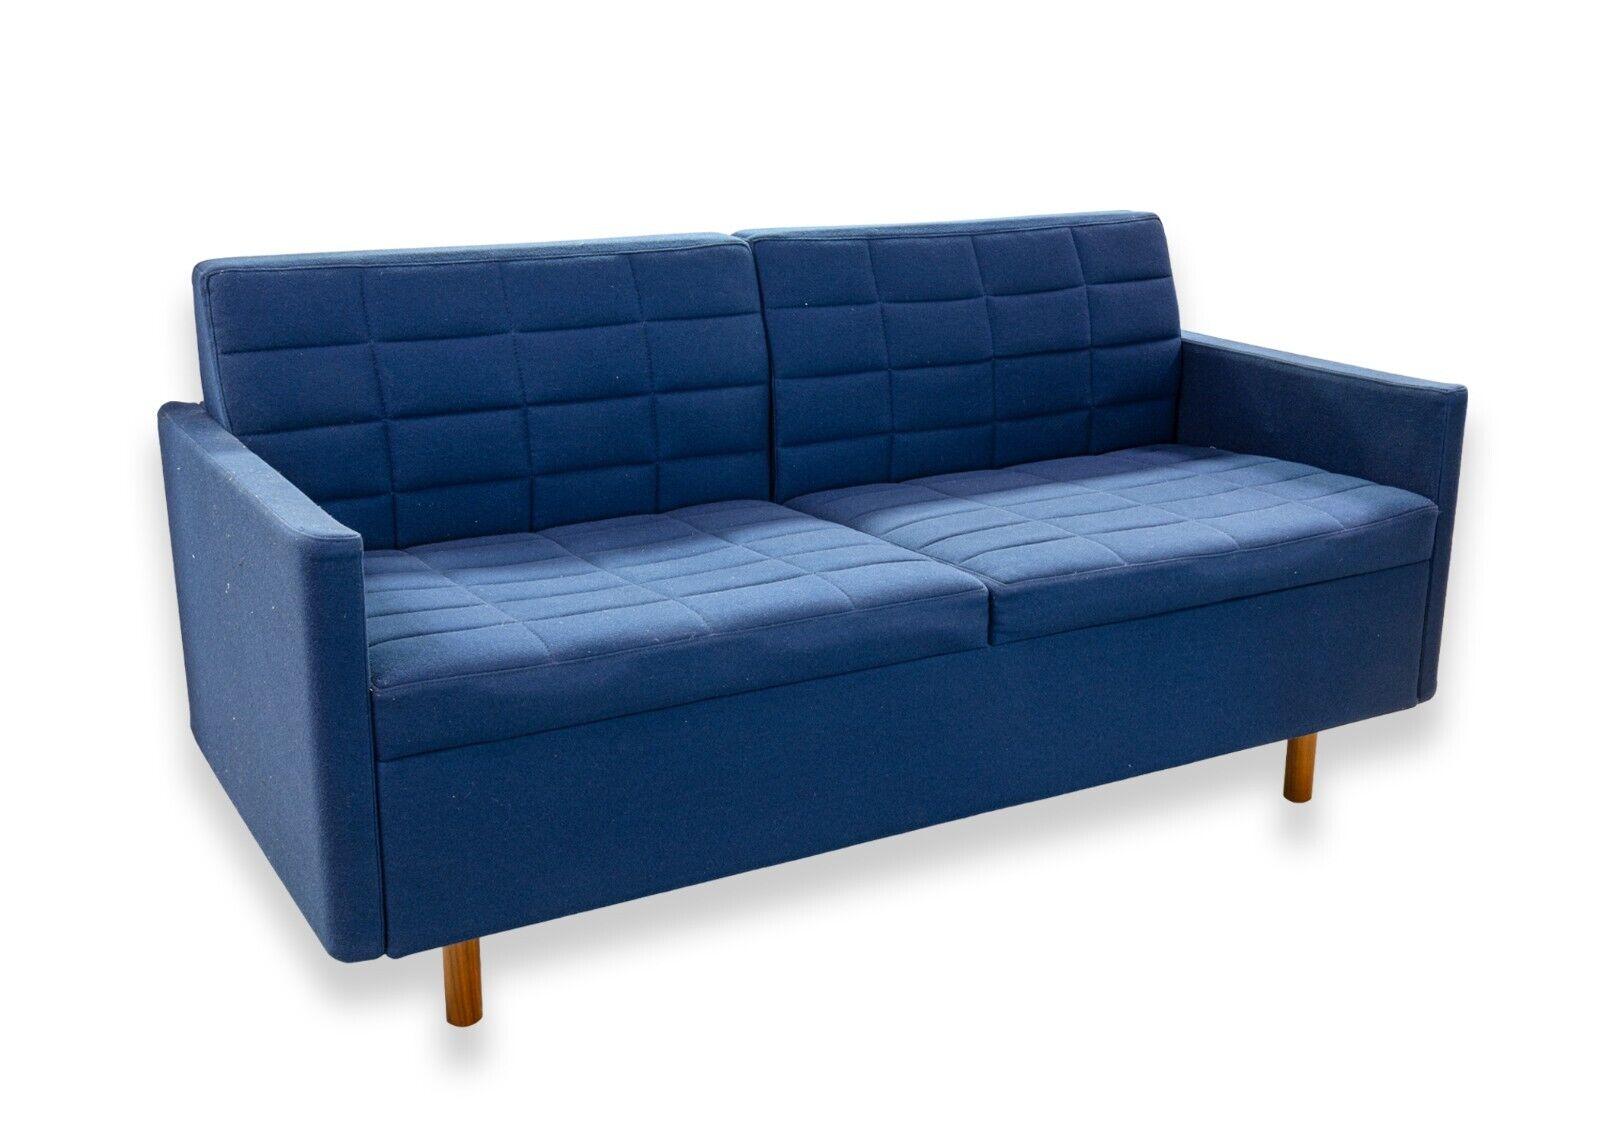 A Herman Miller x Geiger International Tuxedo Classic Blue Settee Loveseat. This is a gorgeous contemporary loveseat from a collaboration of Herman Miller and Geiger International. This lovely sofa features a lush, deep blue tufted upholstery made